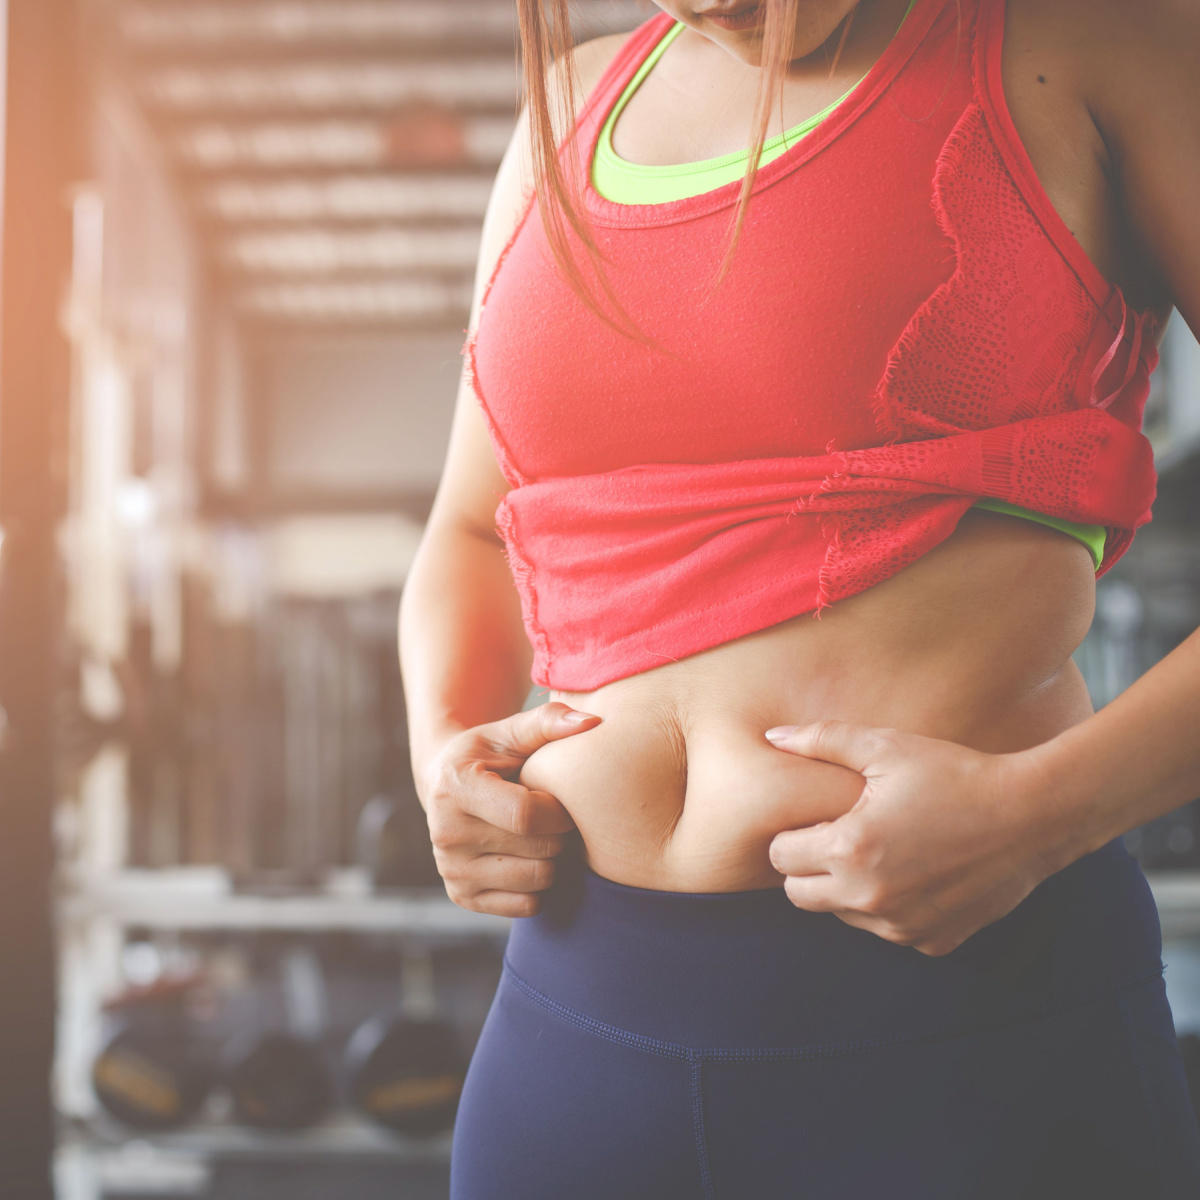 A Personal Trainer Tells Us The 3 Most Ineffective Exercises For Belly Fat  - SHEfinds